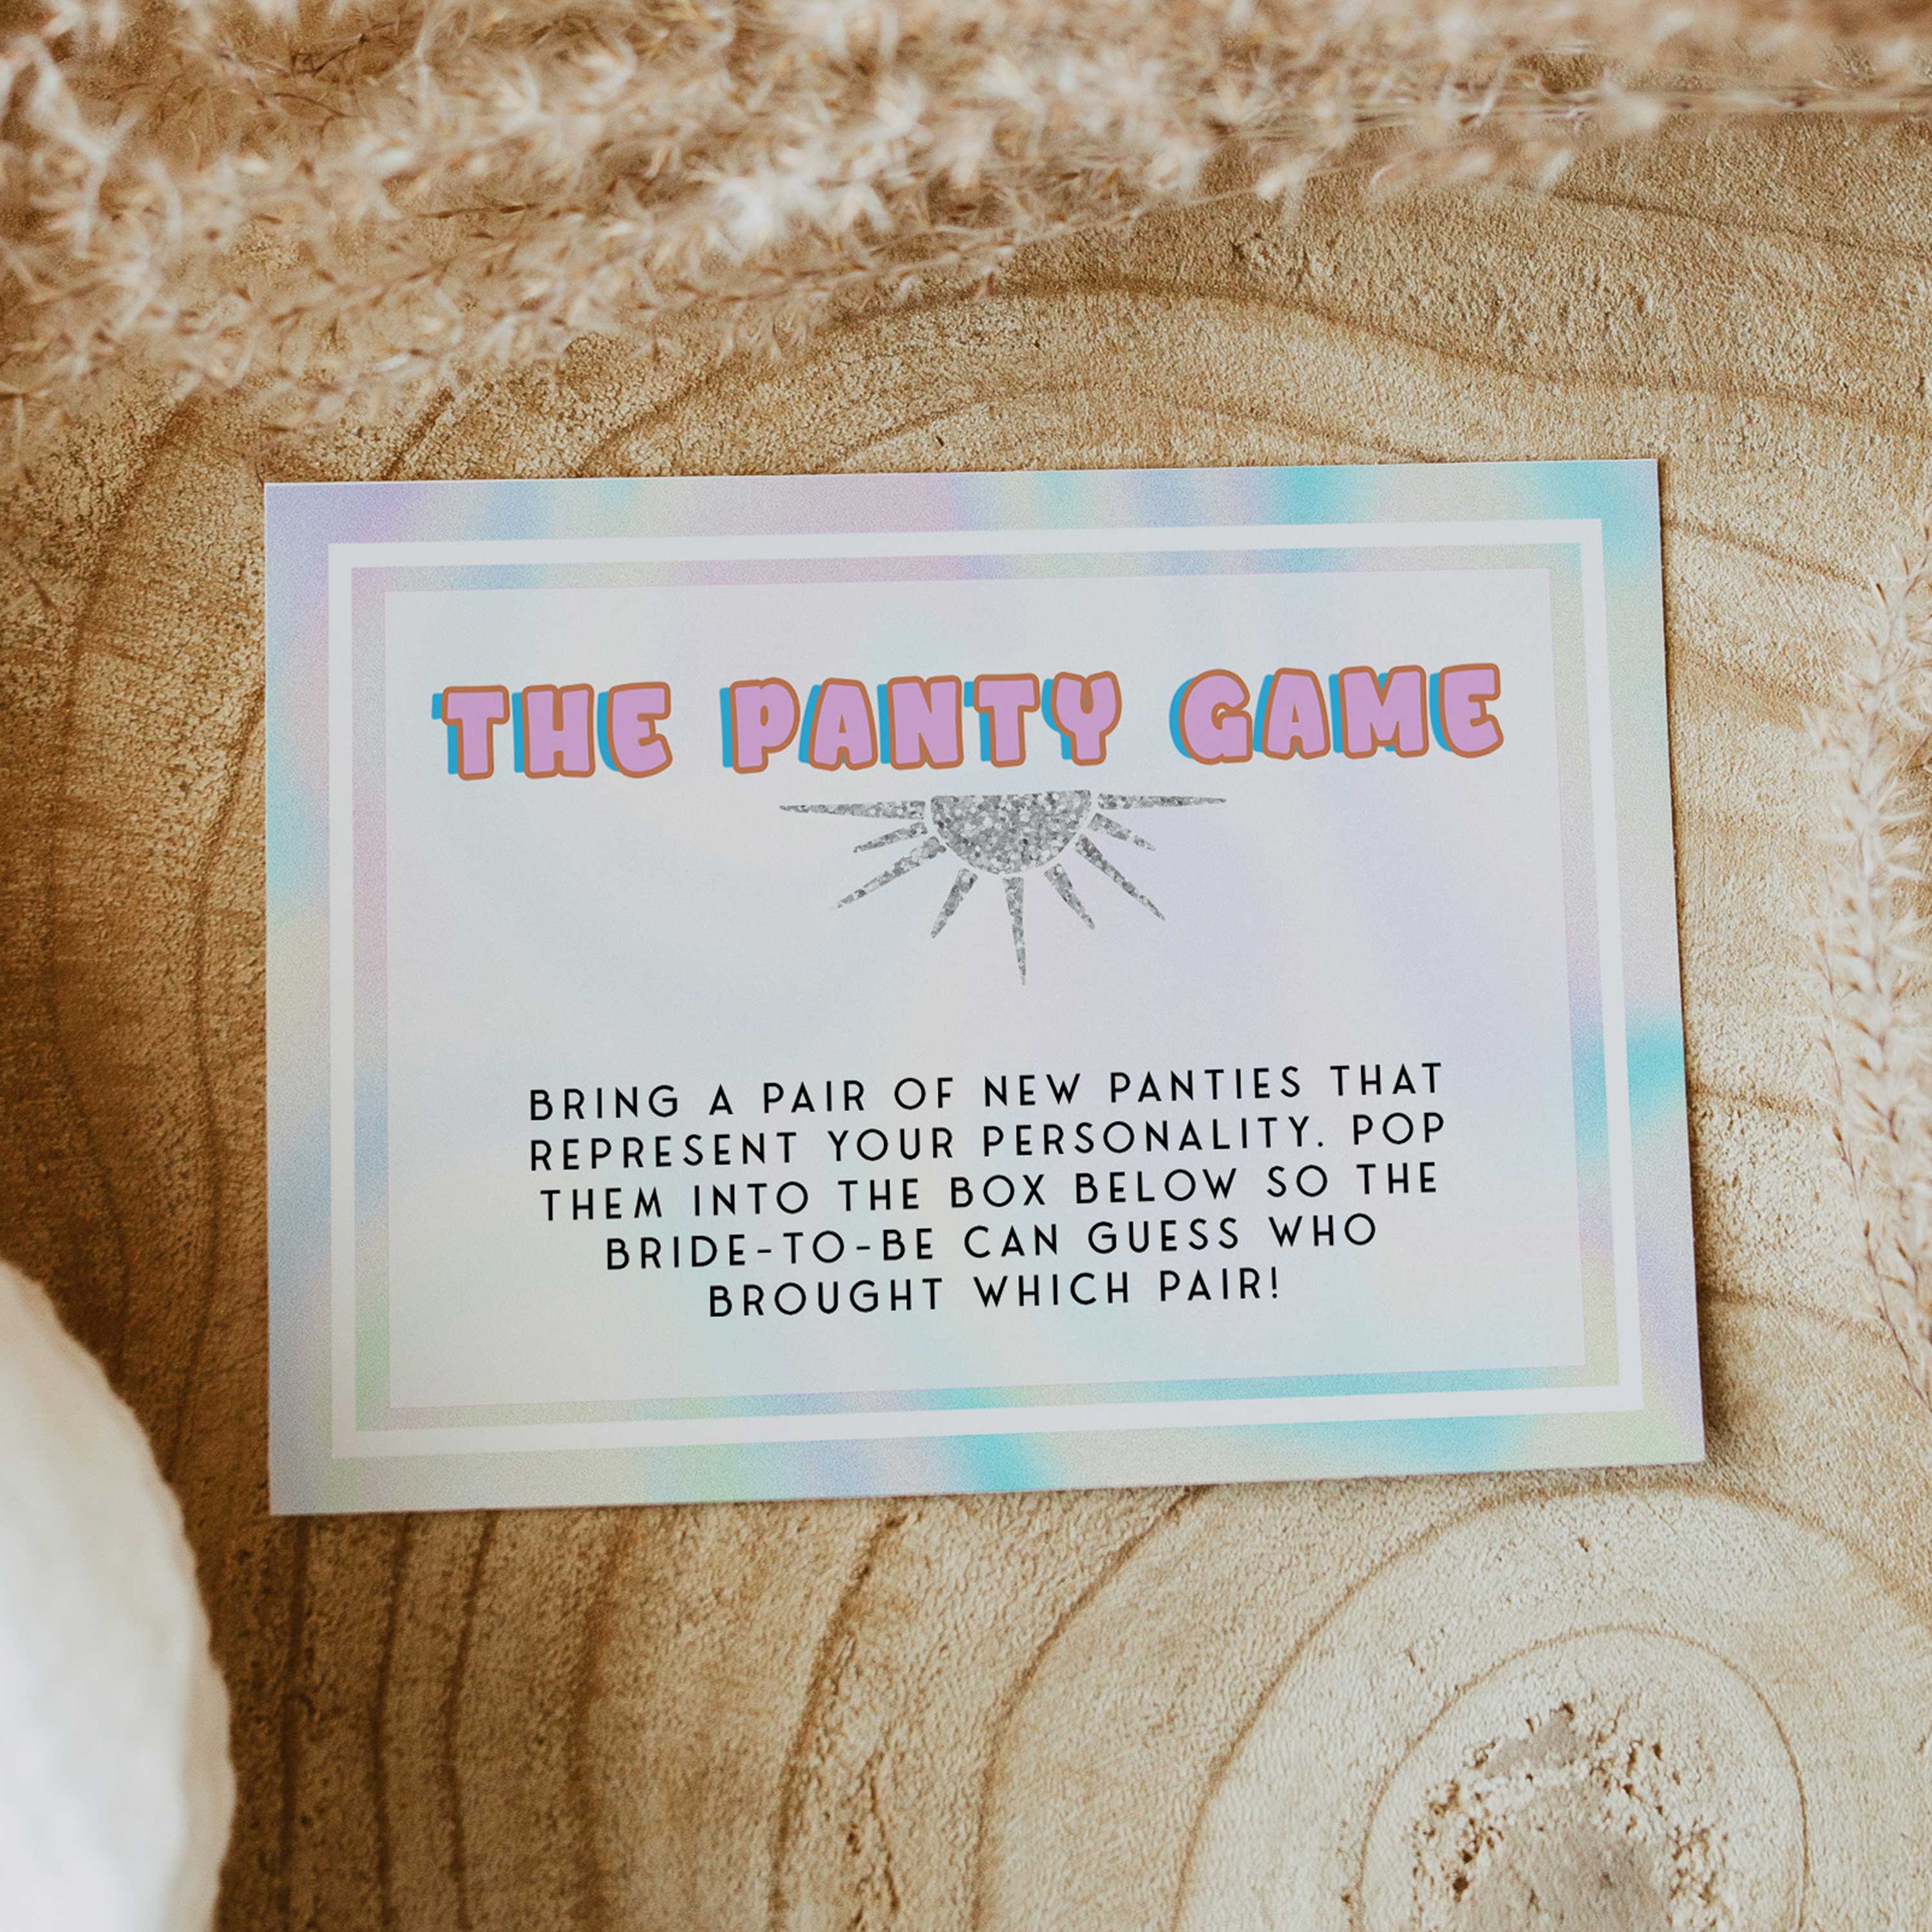 drop your panties game, Space cowgirl bridal shower games, printable bridal shower games, bridal games, bridal shower games, disco bridal games